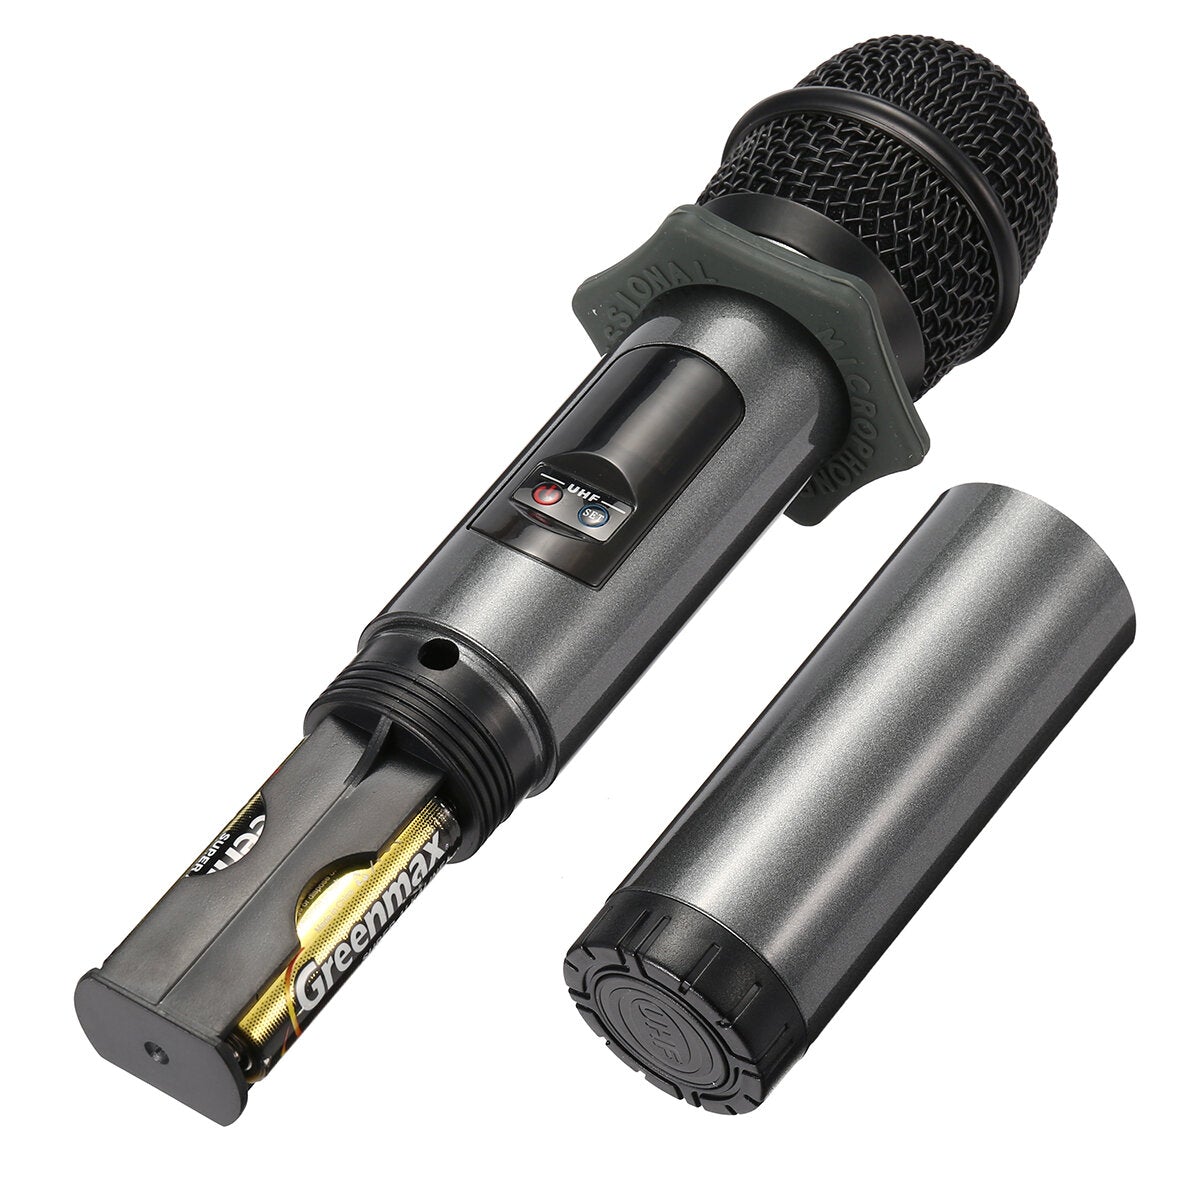 Handheld Dynamic Microphone Wireless System